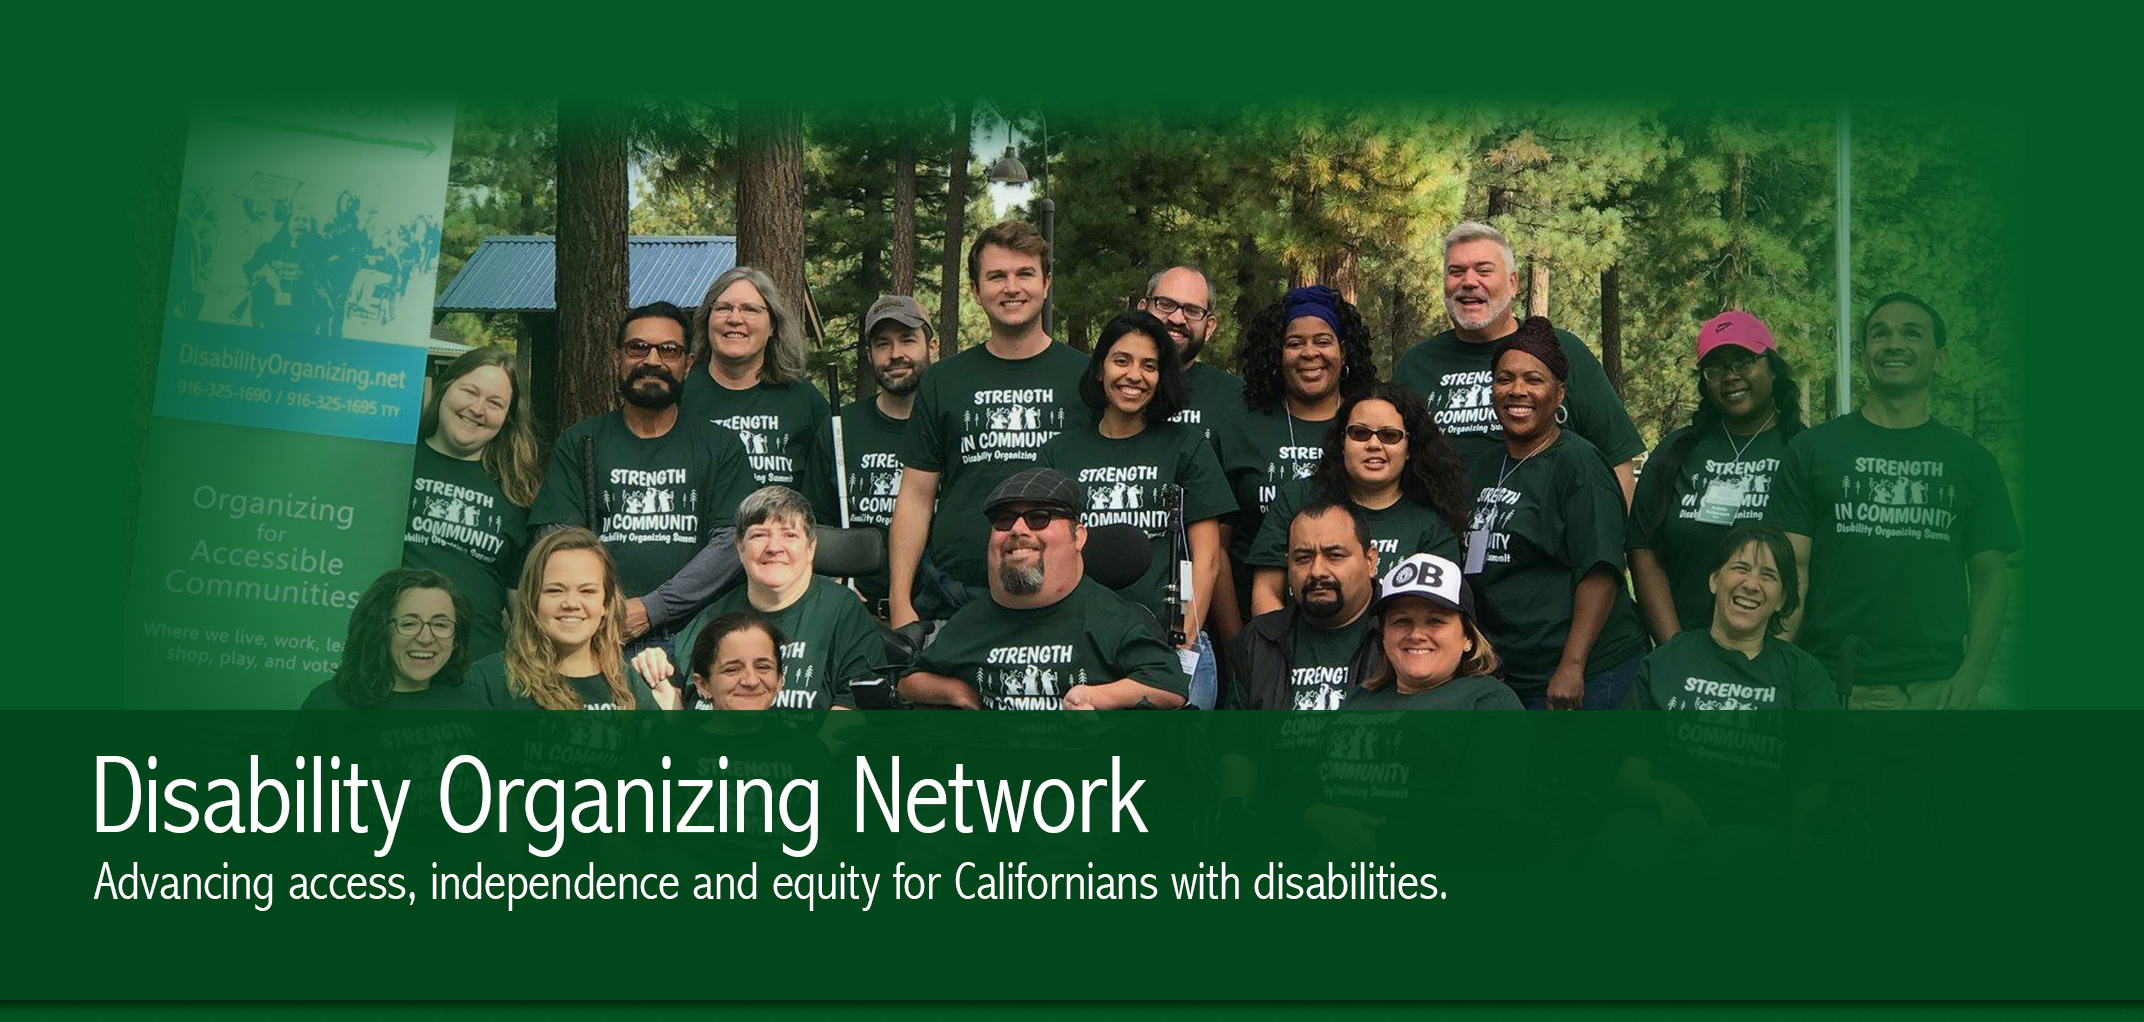 Disability Organizing Network. Advancing access, independence and equity for Californians with disabilities. A large group photo of smiling community organizers.